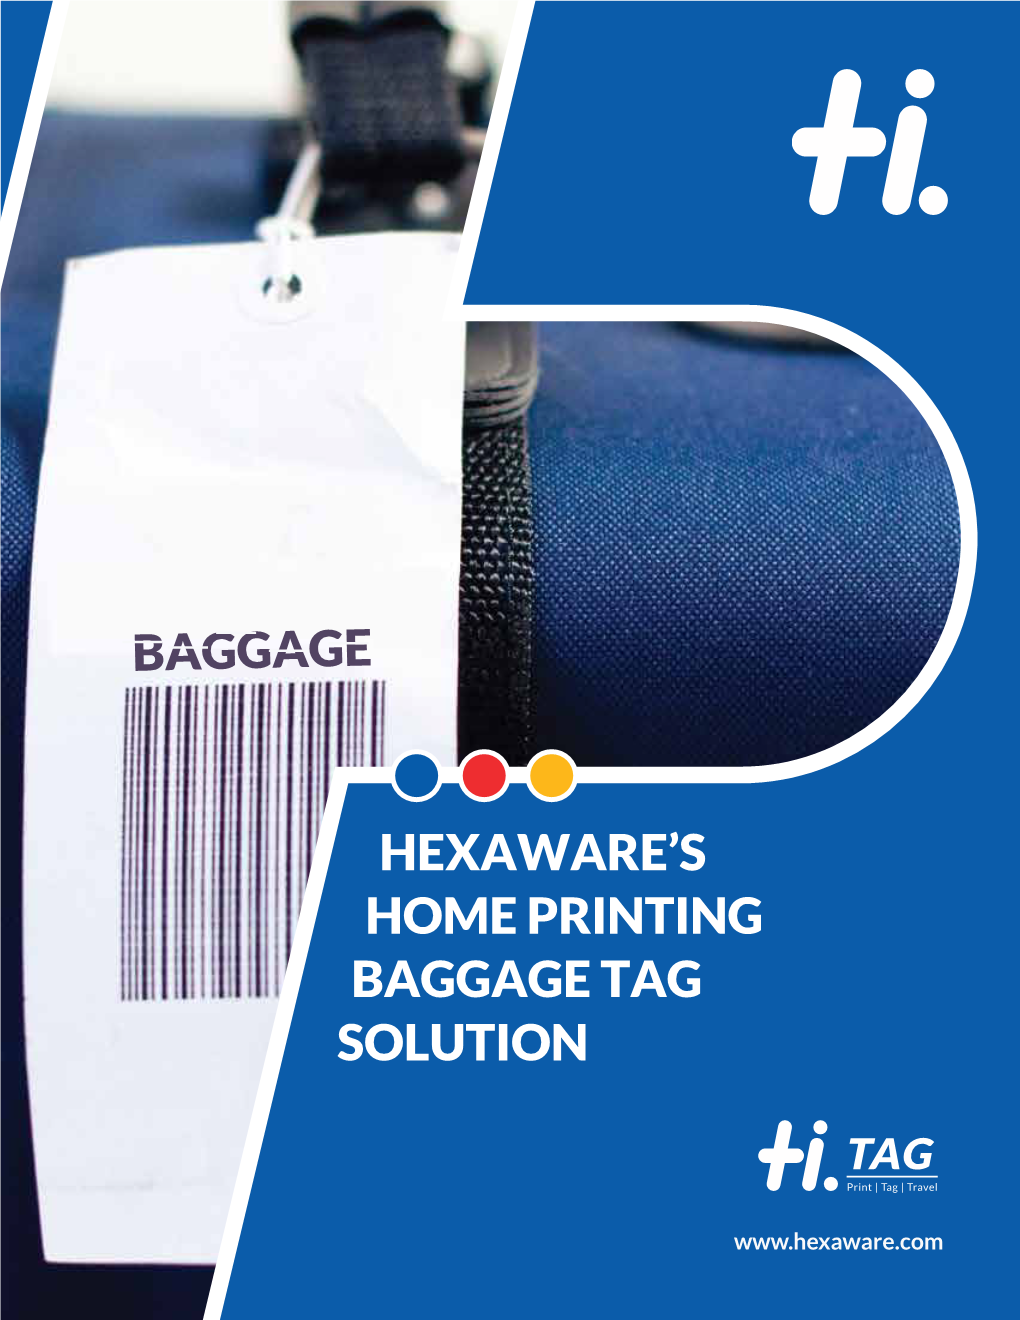 Hexaware's Home Printing Baggage Tag Solution